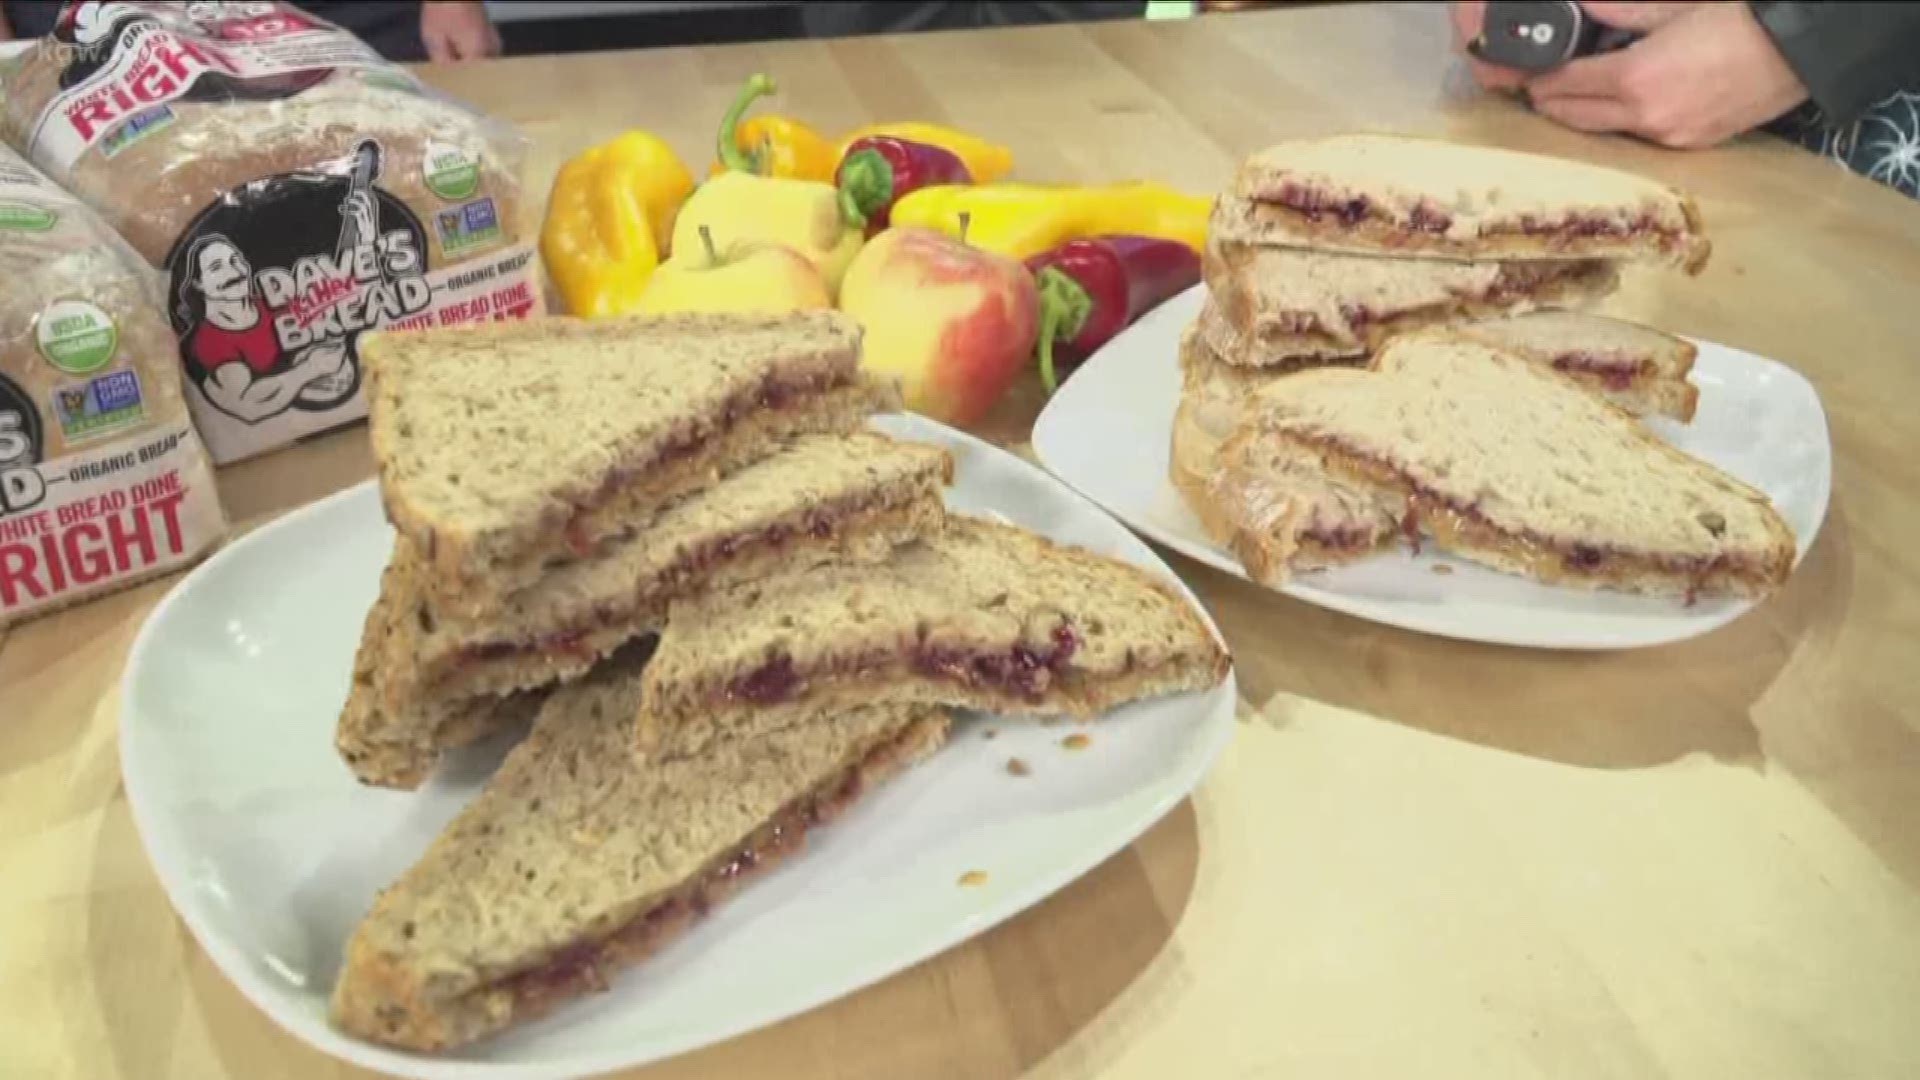 Dave's Killer Bread and the Portland Farmers Market are teaming up to create an official peanut butter and jelly sandwich for the Portland Trail Blazers.